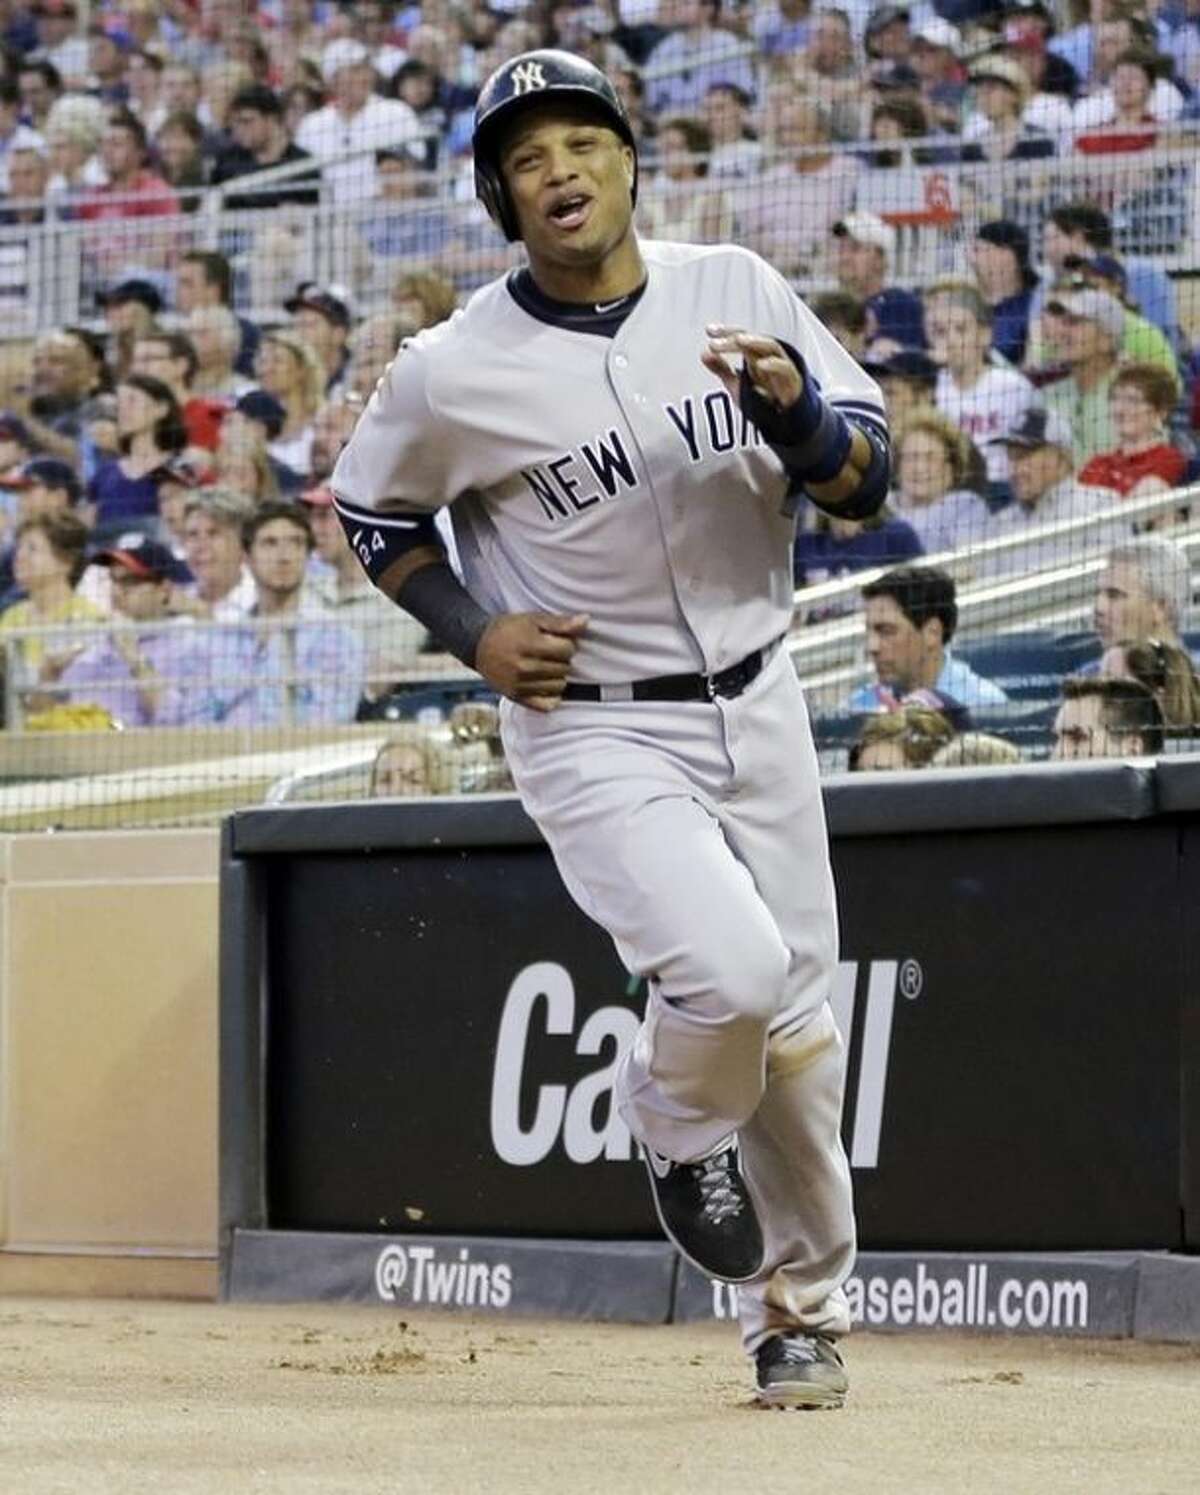 New York Yankees' Robinson Cano races to the dugout after scoring the go-ahead run on a sacrifice fly by Lyle Overbay off Minnesota Twins pitcher Caleb Thielbar in the sixth inning of a baseball game on Wednesday, July 3, 2013, in Minneapolis. (AP Photo/Jim Mone)